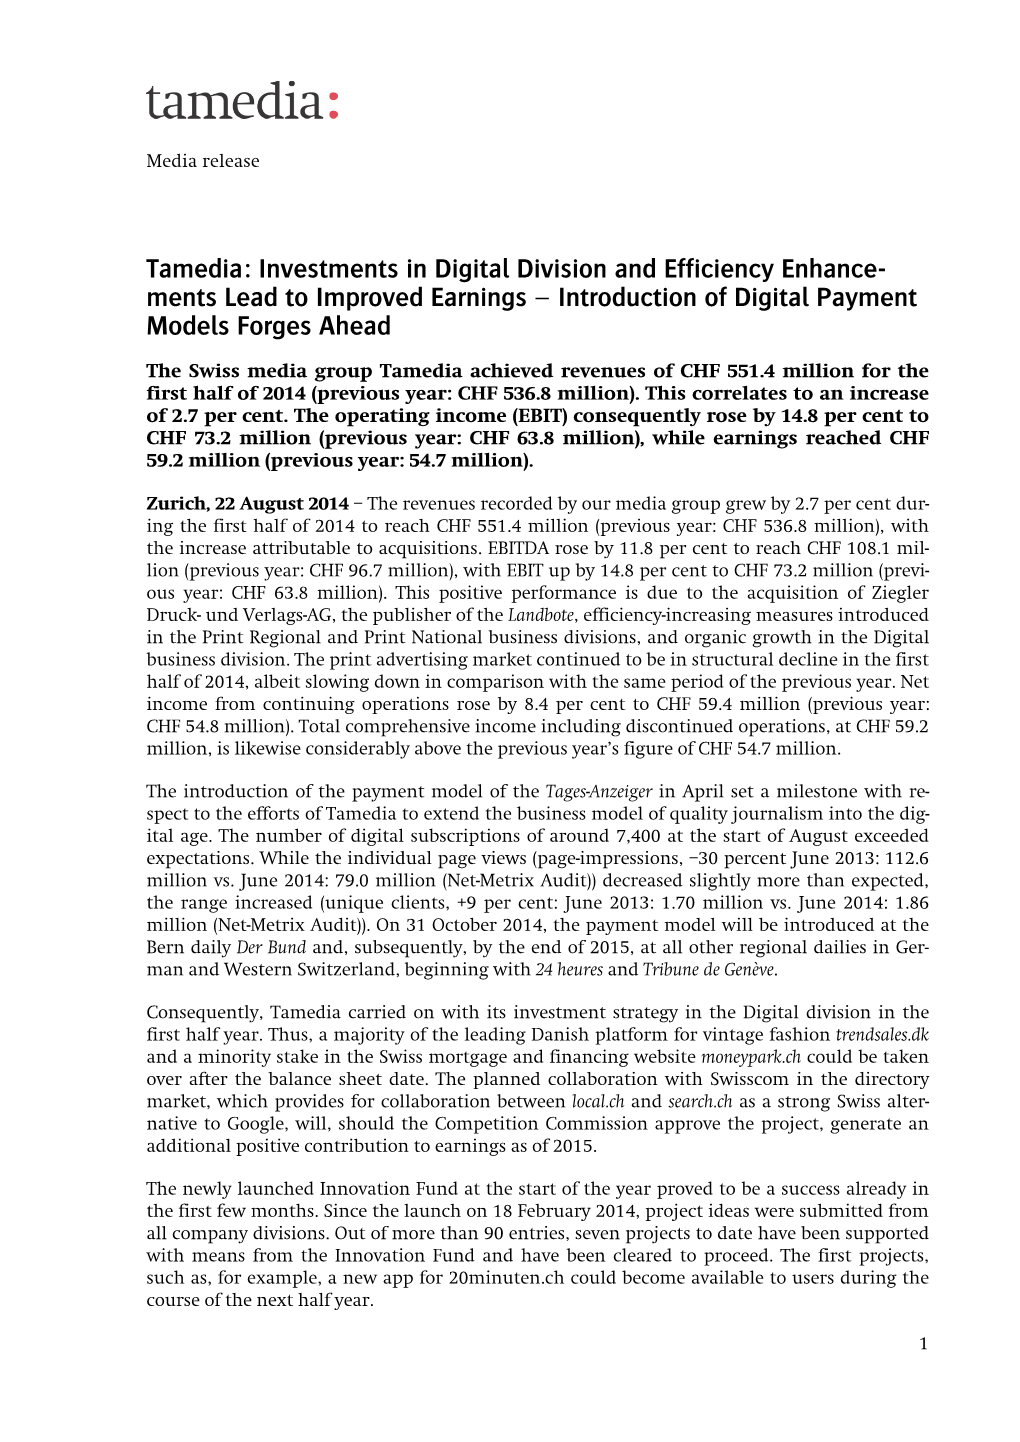 Tamedia: Investments in Digital Division and Efficiency Enhance- Ments Lead to Improved Earnings – Introduction of Digital Payment Models Forges Ahead